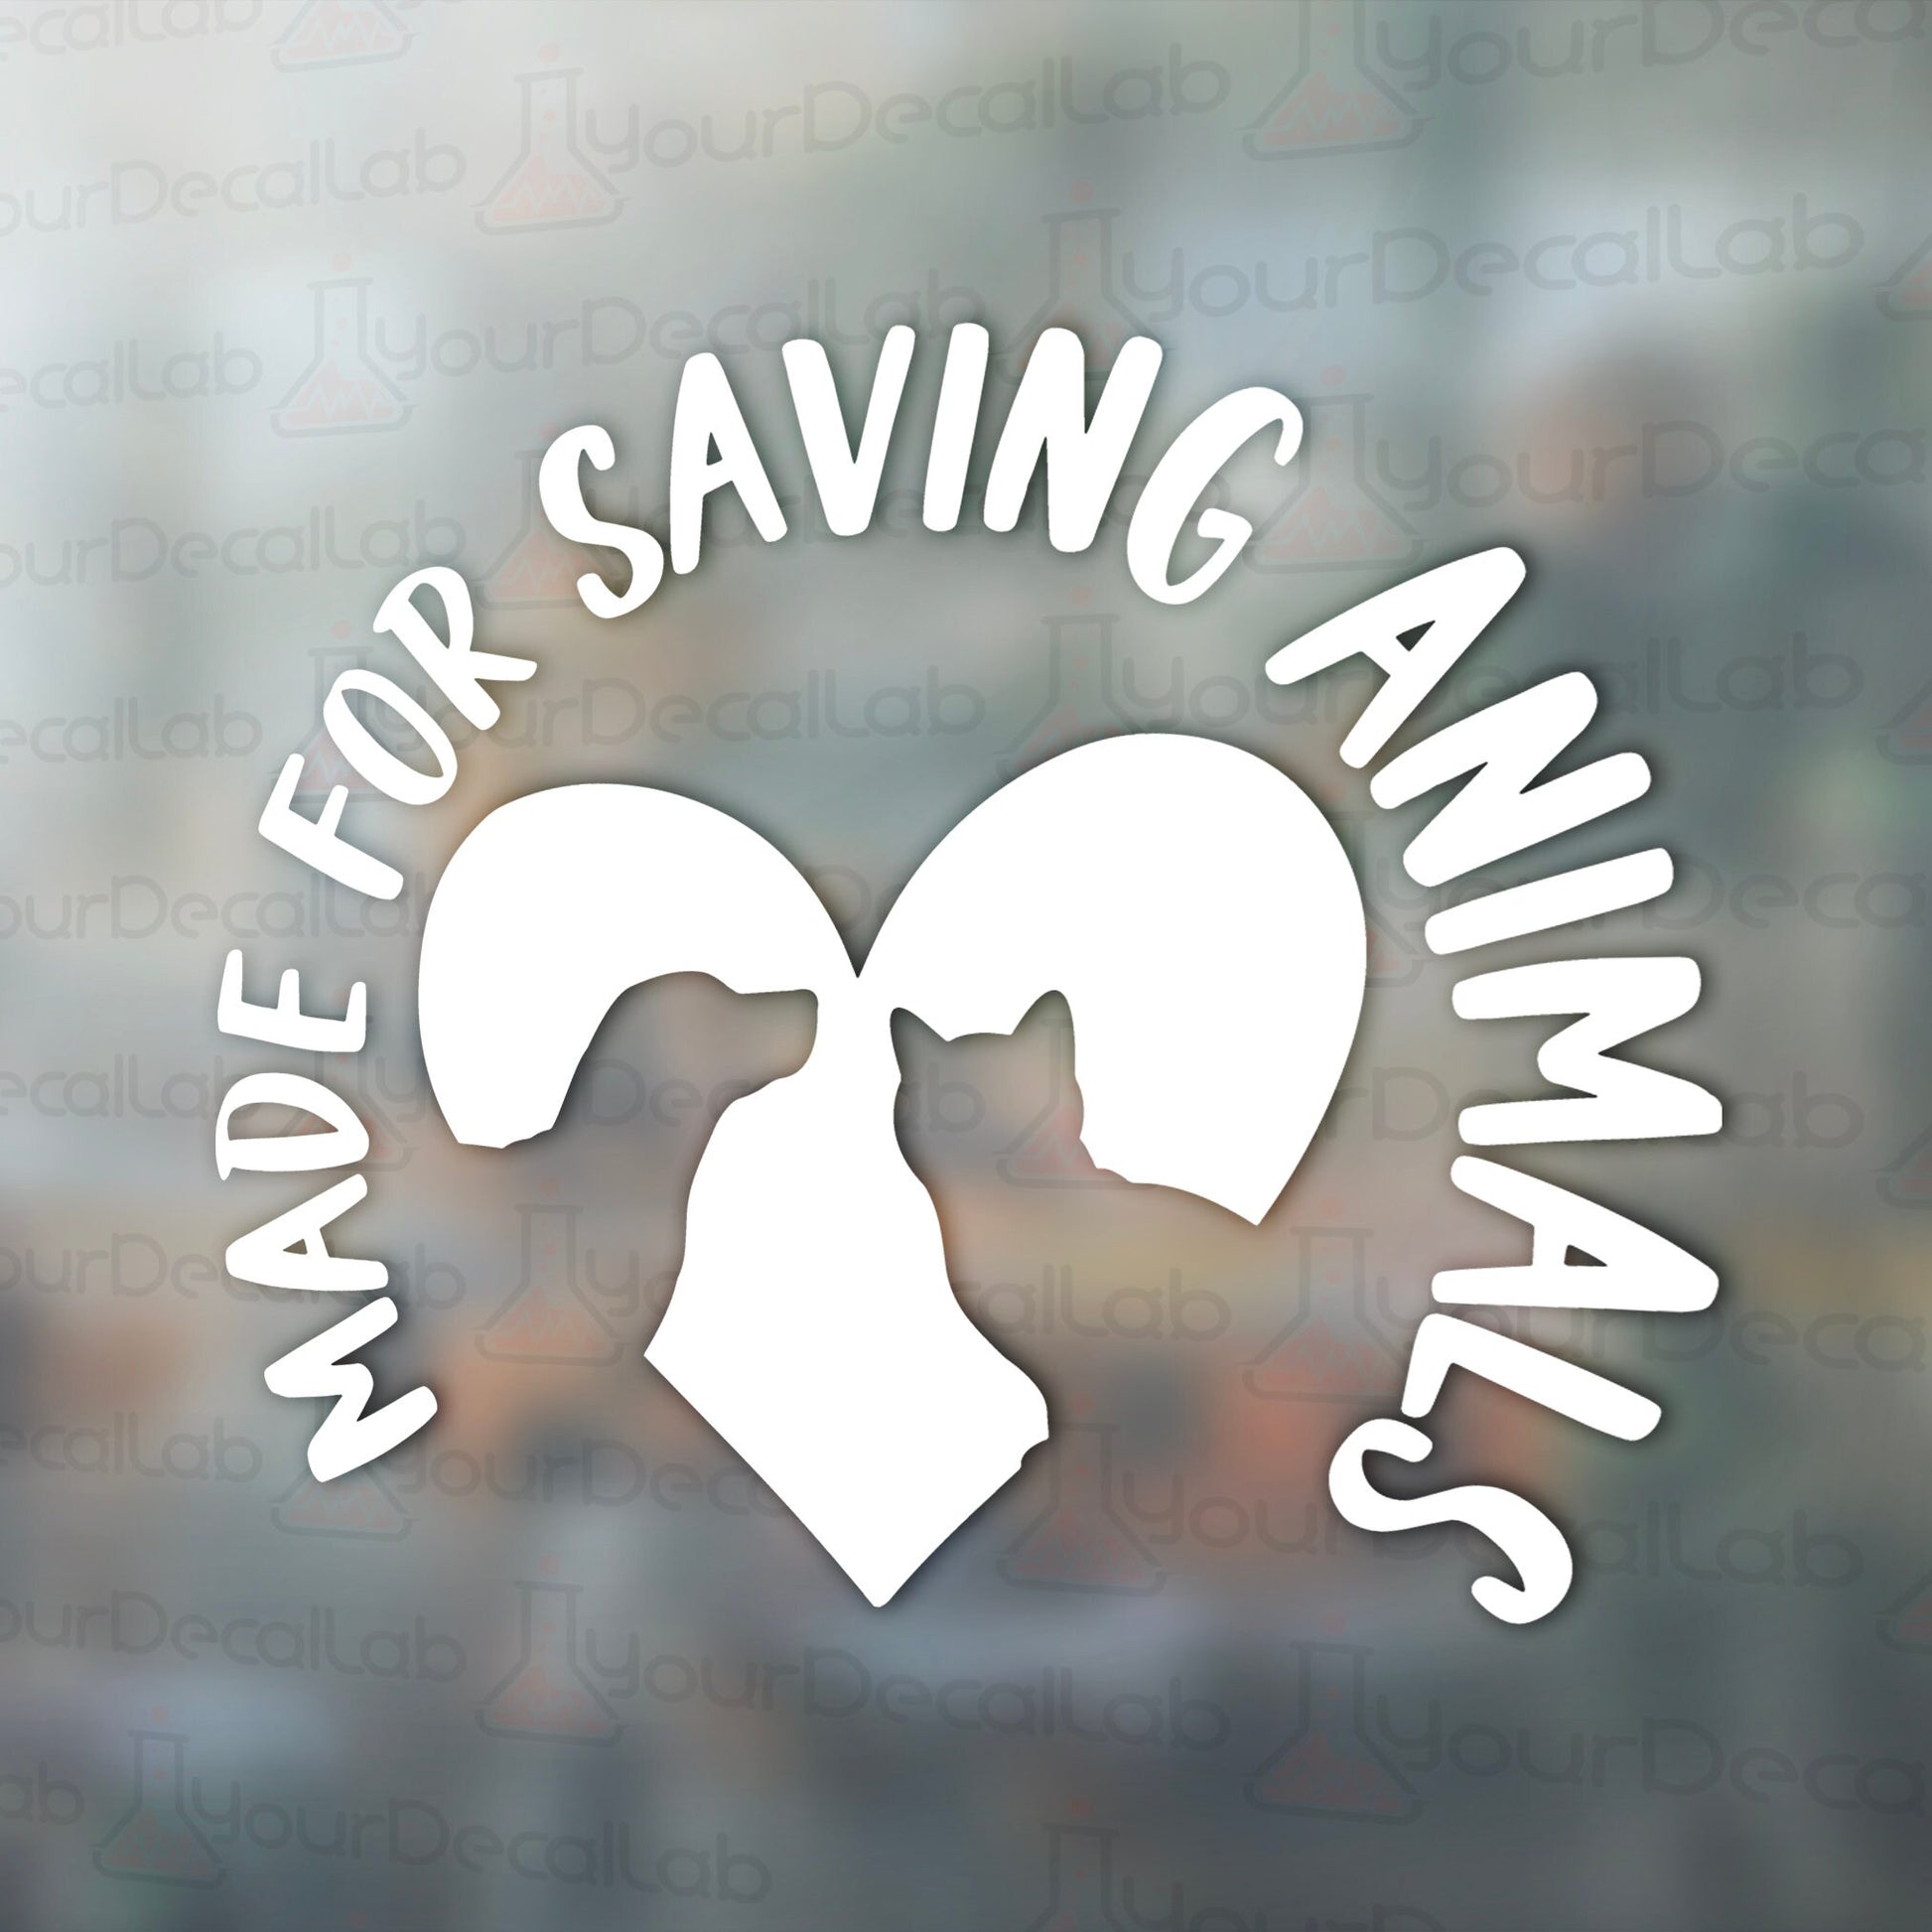 a sticker that says made for saving animals